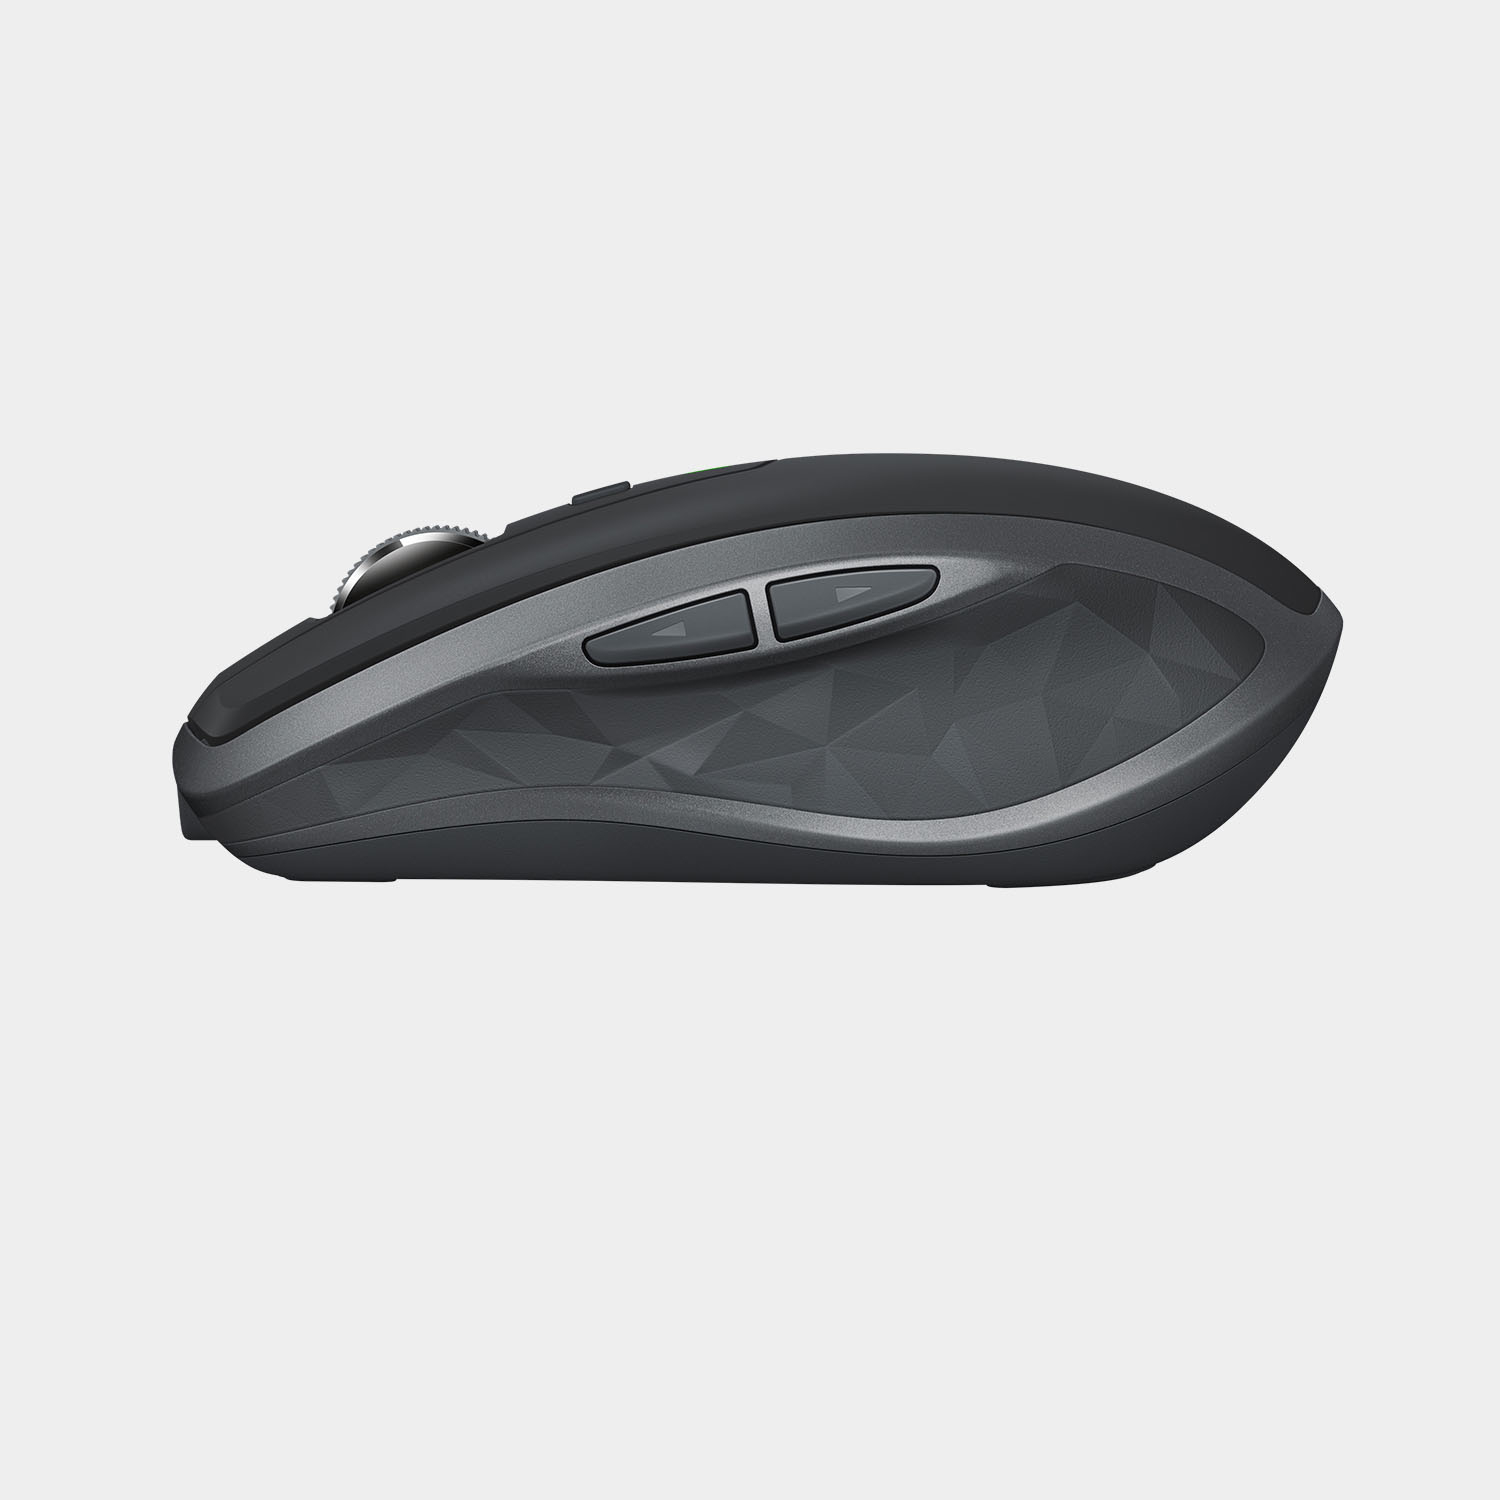 Logitech MX Anywhere 2S Wireless Laser Mouse 910-005748 - Best